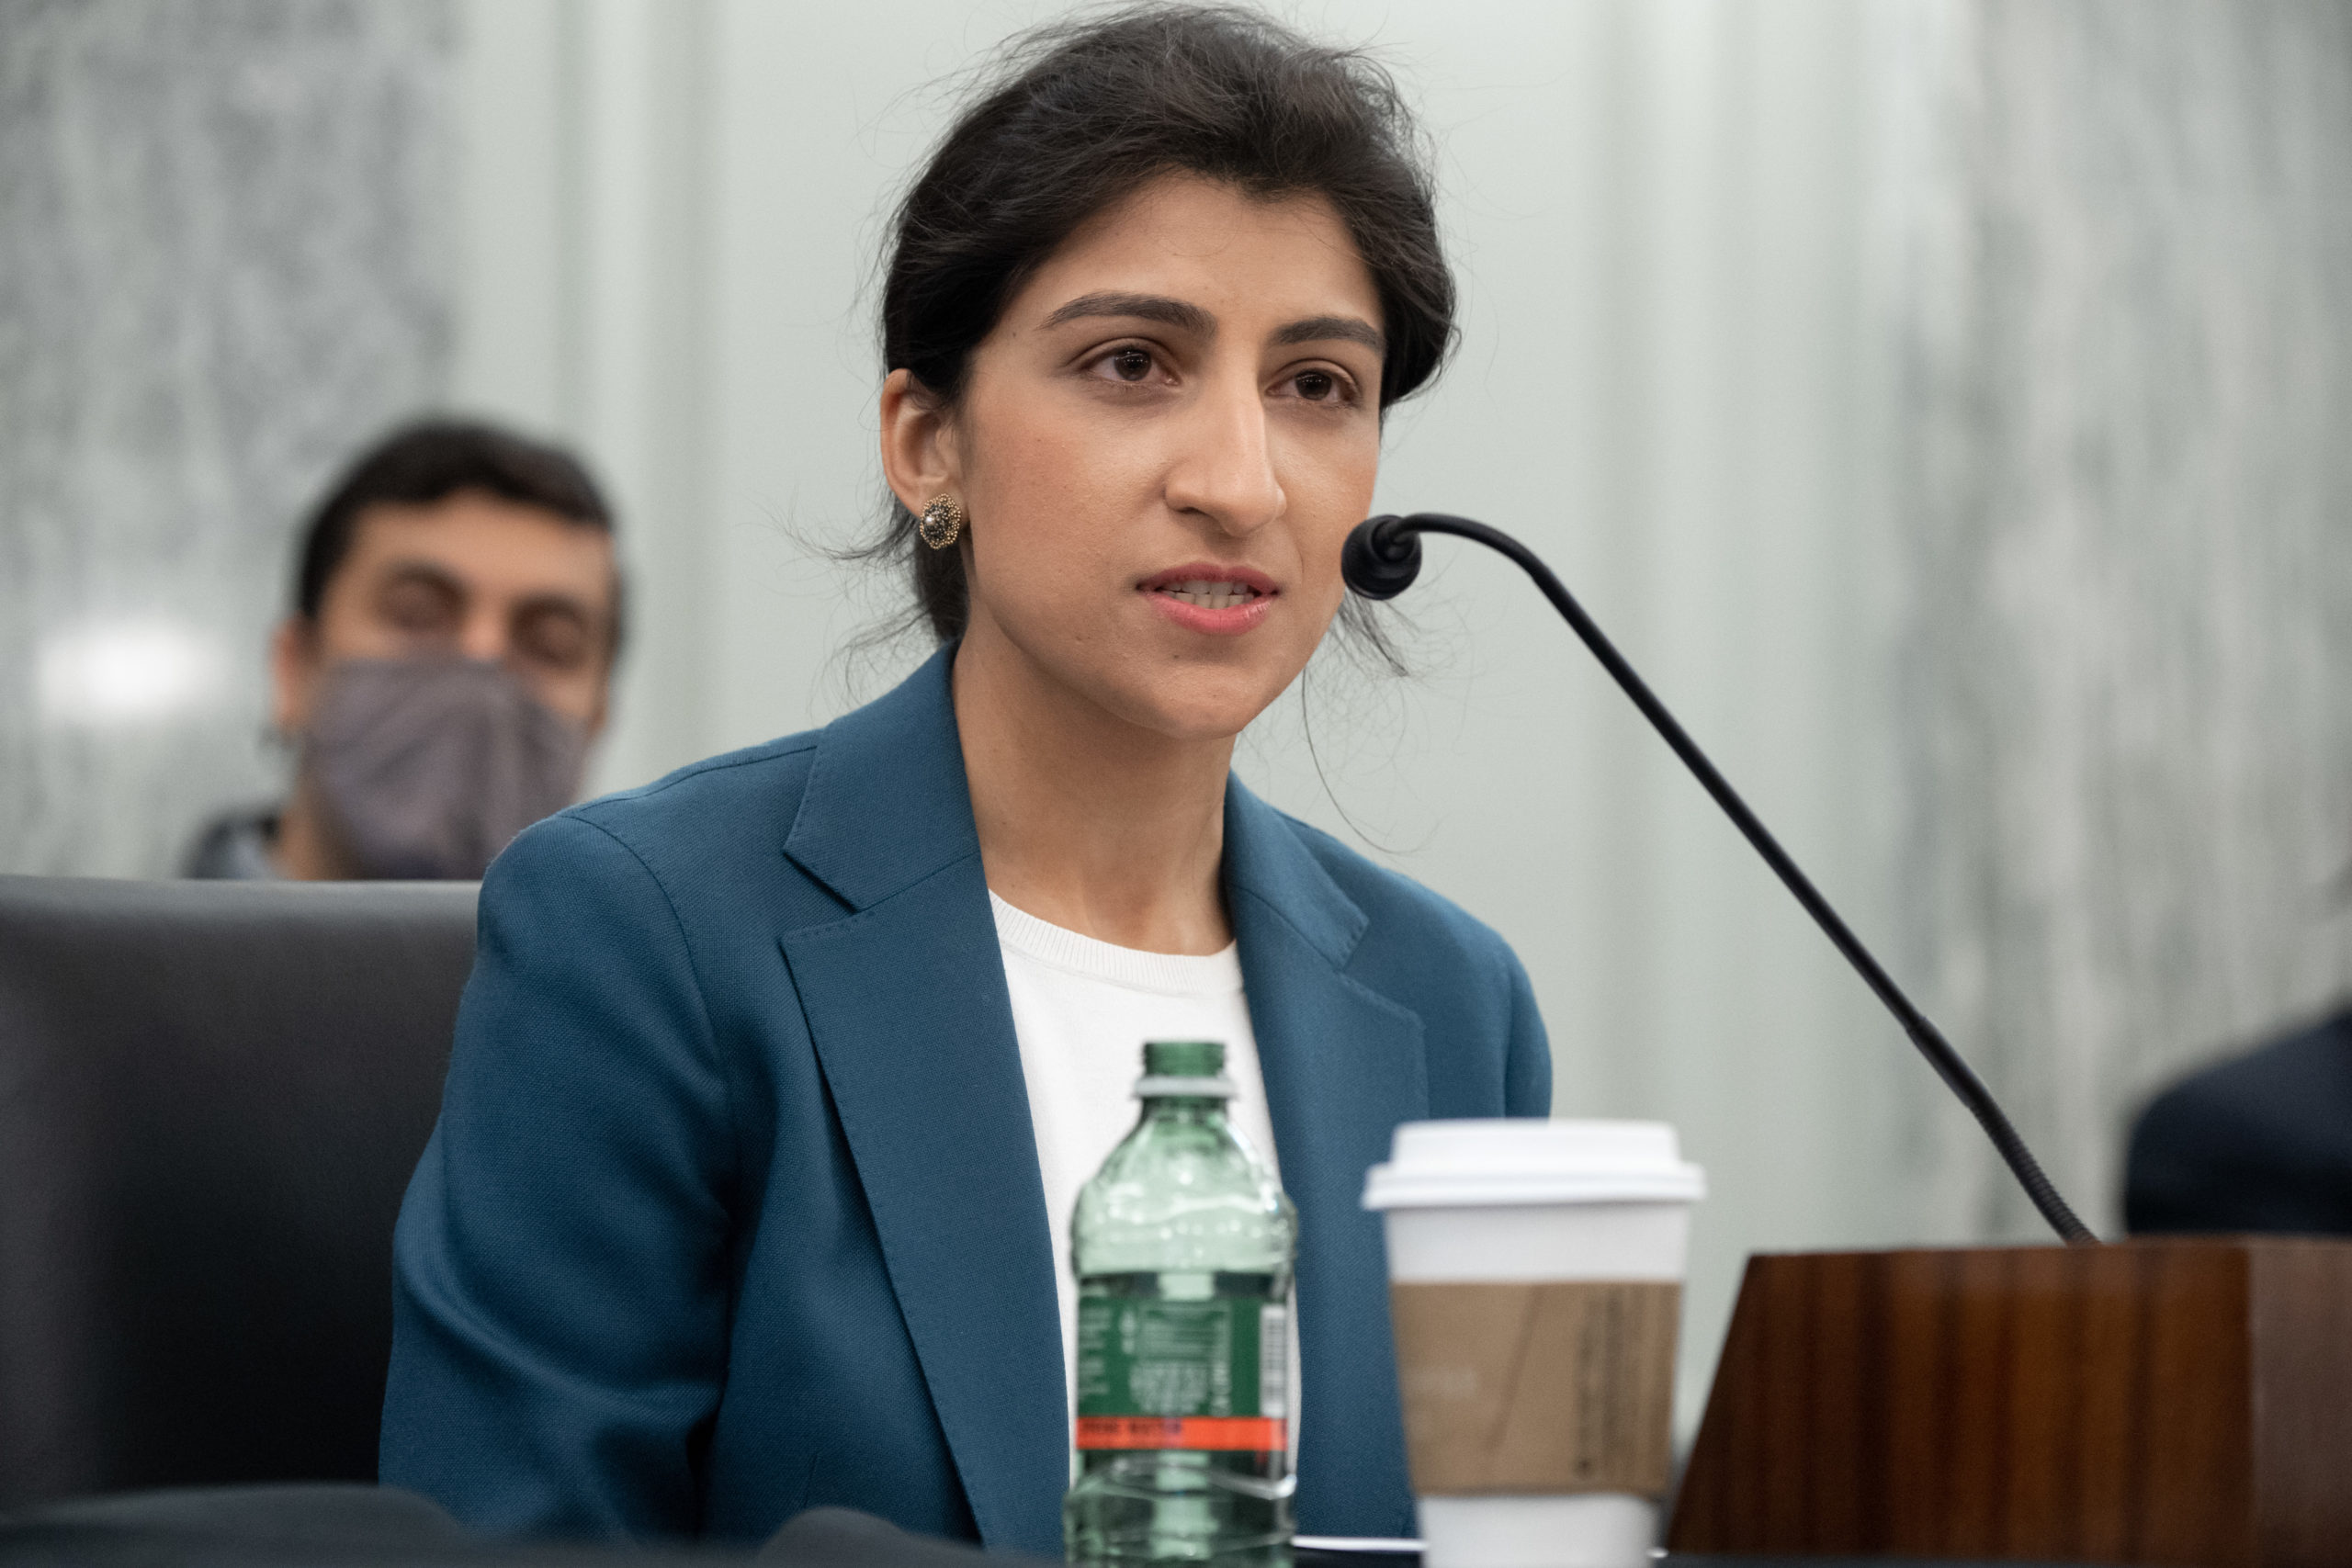 WASHINGTON, DC - APRIL 21: Lina Khan, then-nominee for Commissioner of the Federal Trade Commission (FTC), speaks at a Senate Committee on Commerce, Science, and Transportation confirmation hearing on Capitol Hill on April 21, 2021 in Washington, DC. Khan is an associate professor at Columbia Law School. (Photo by Saul Loeb-Pool/Getty Images)